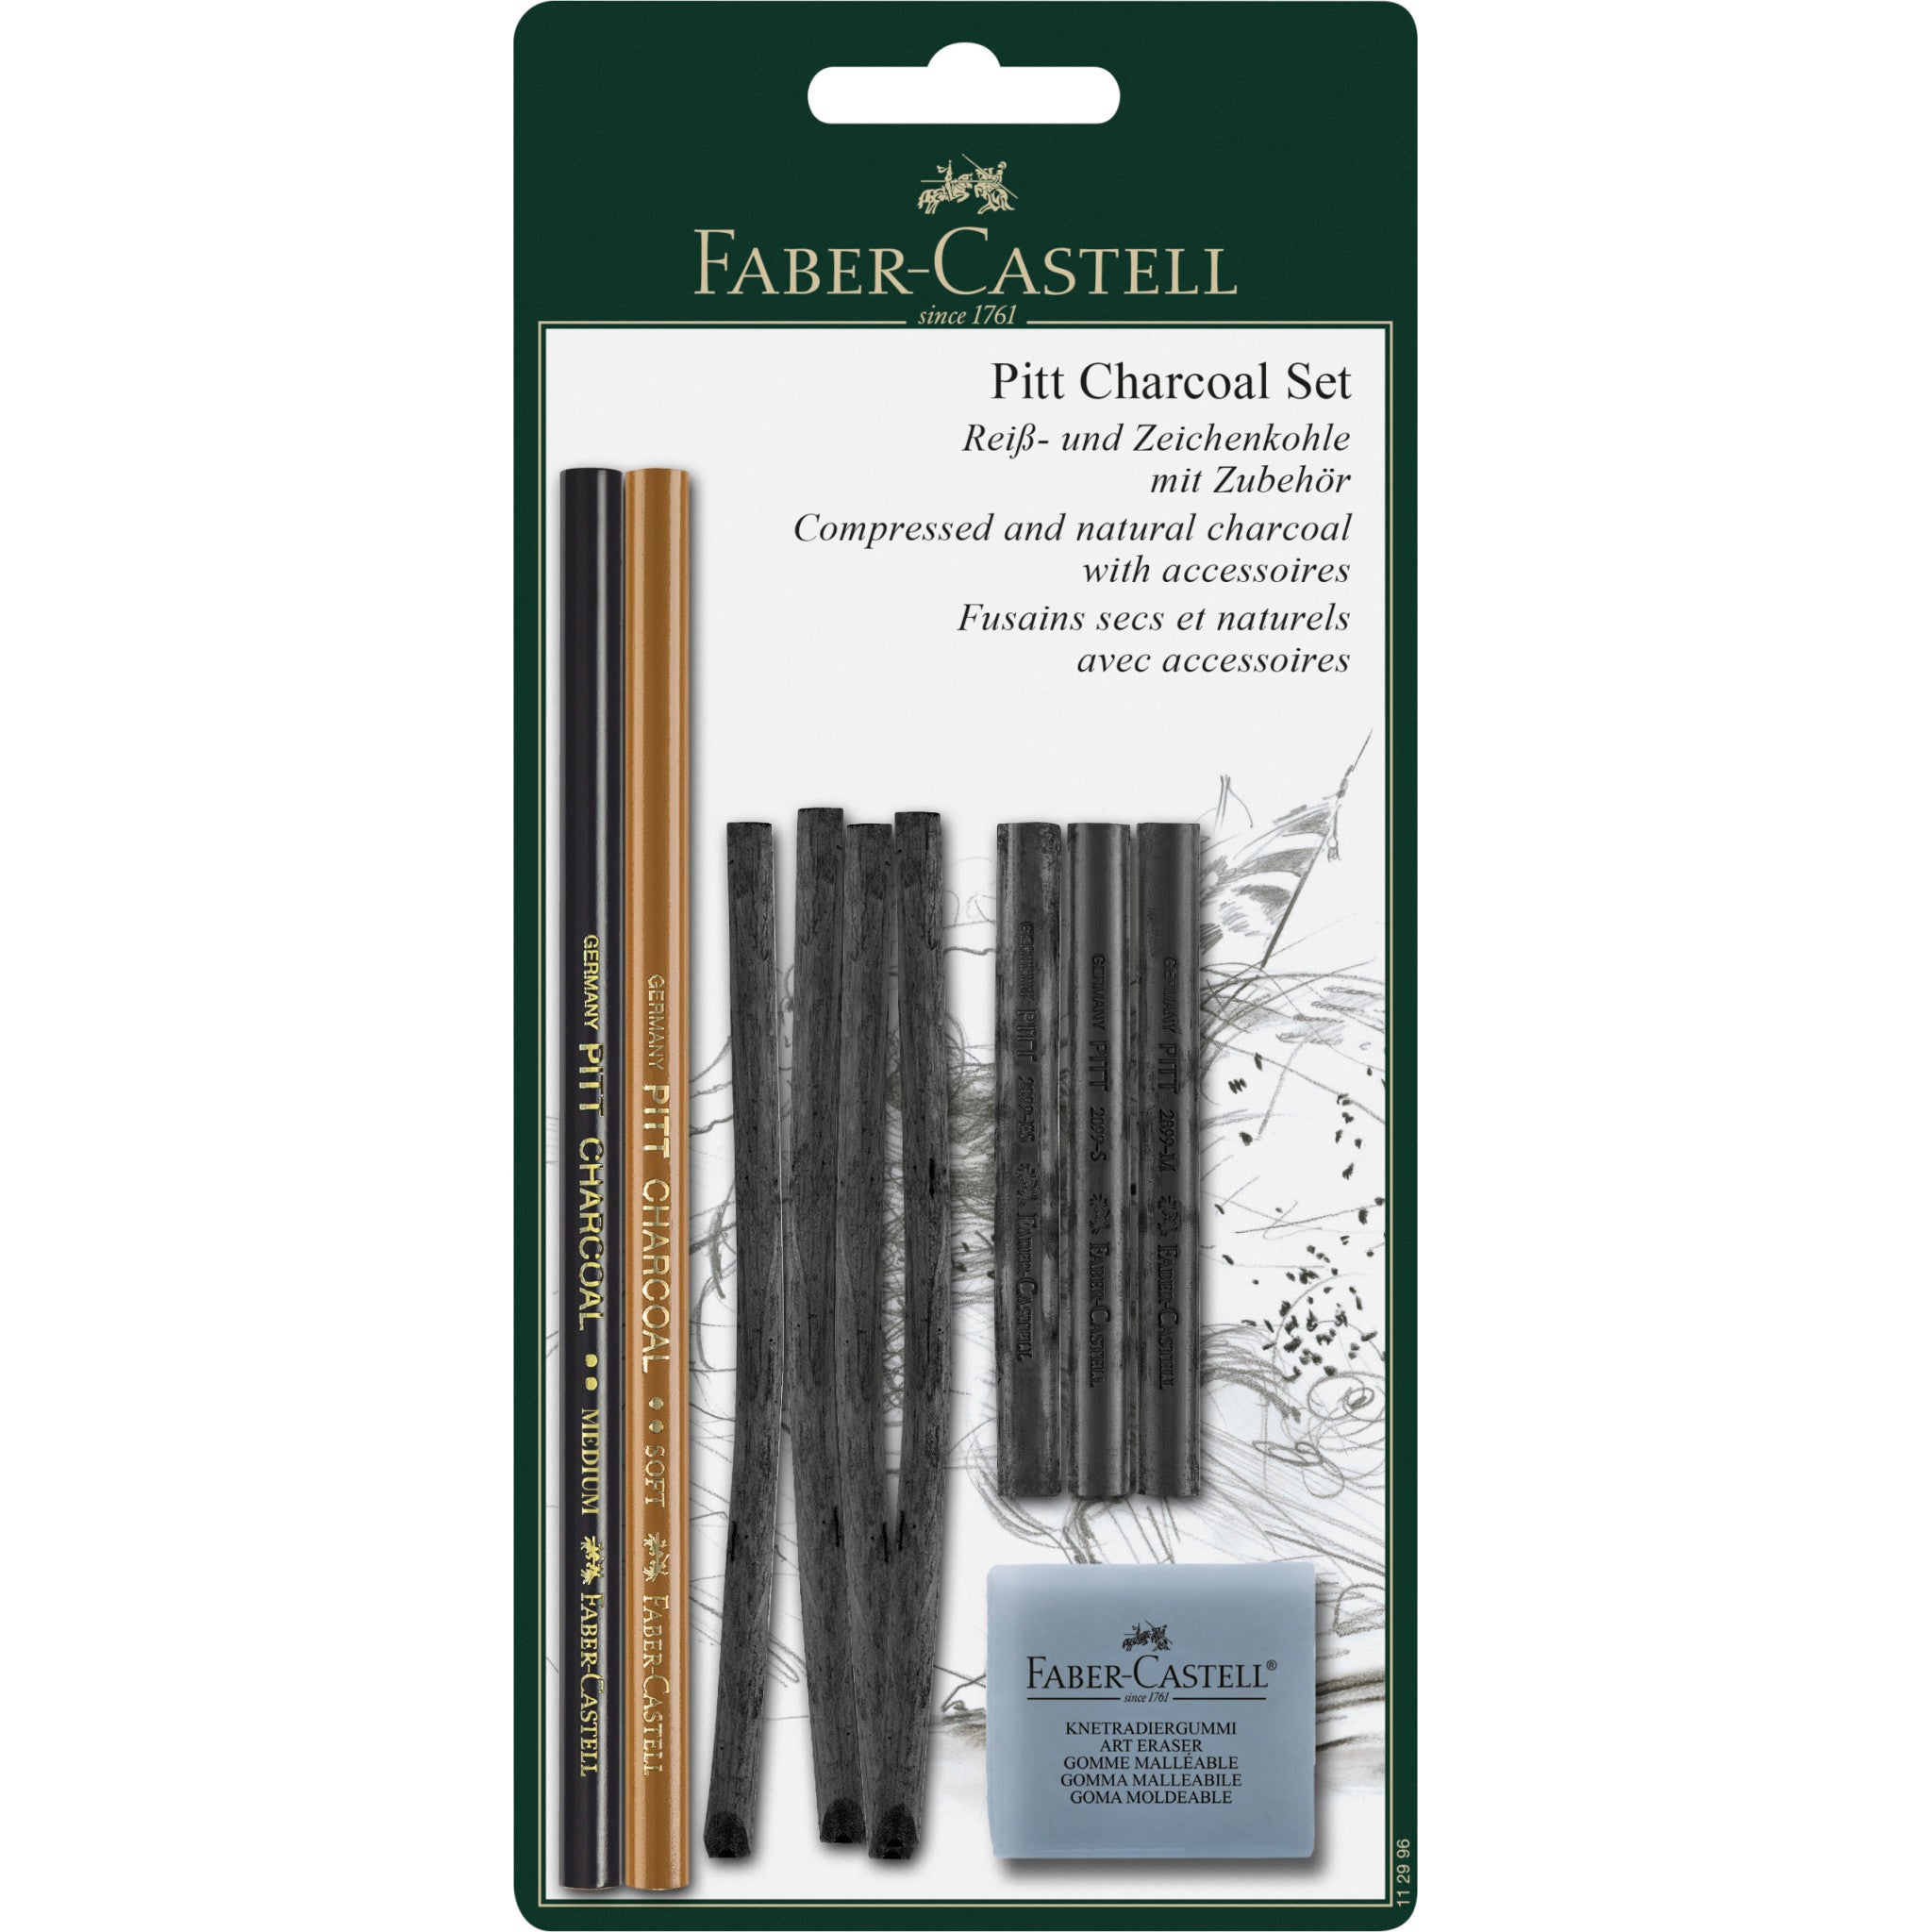 GOMA MOLDEABLE FABER CASTELL